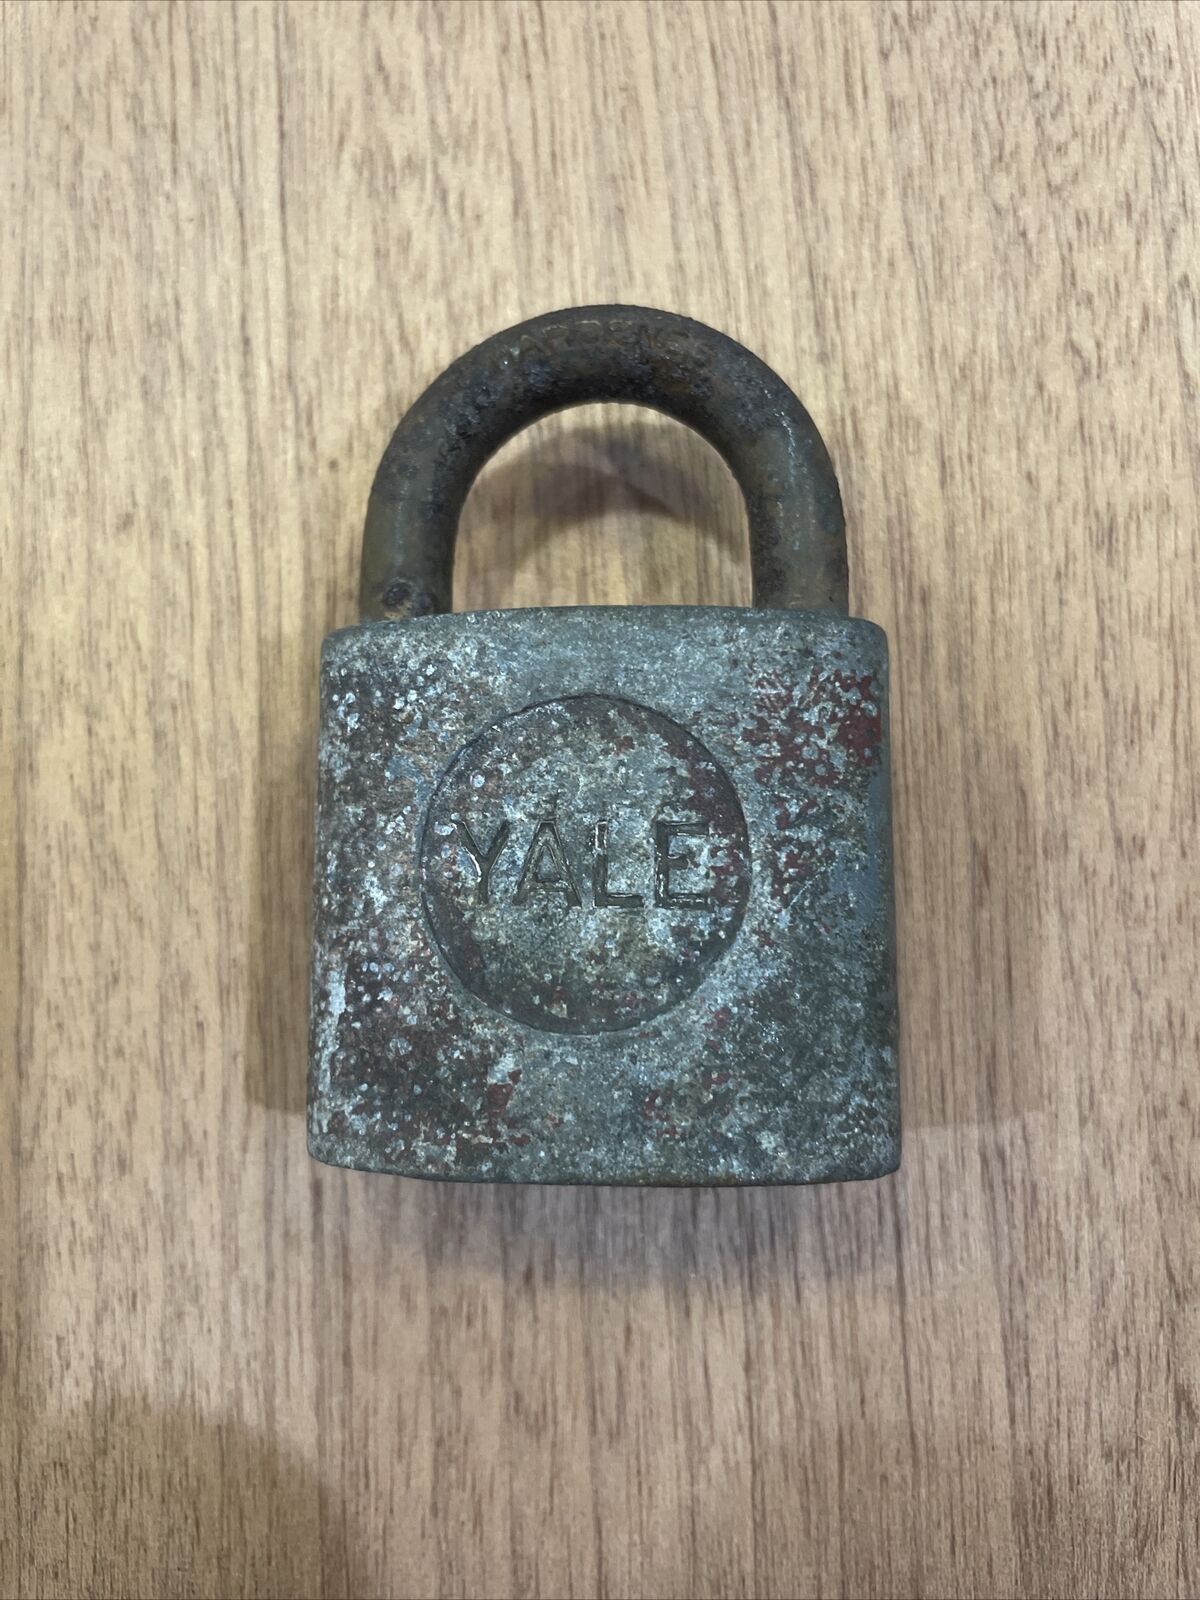 Vintage Yale Red Metal Padlock Made in the USA